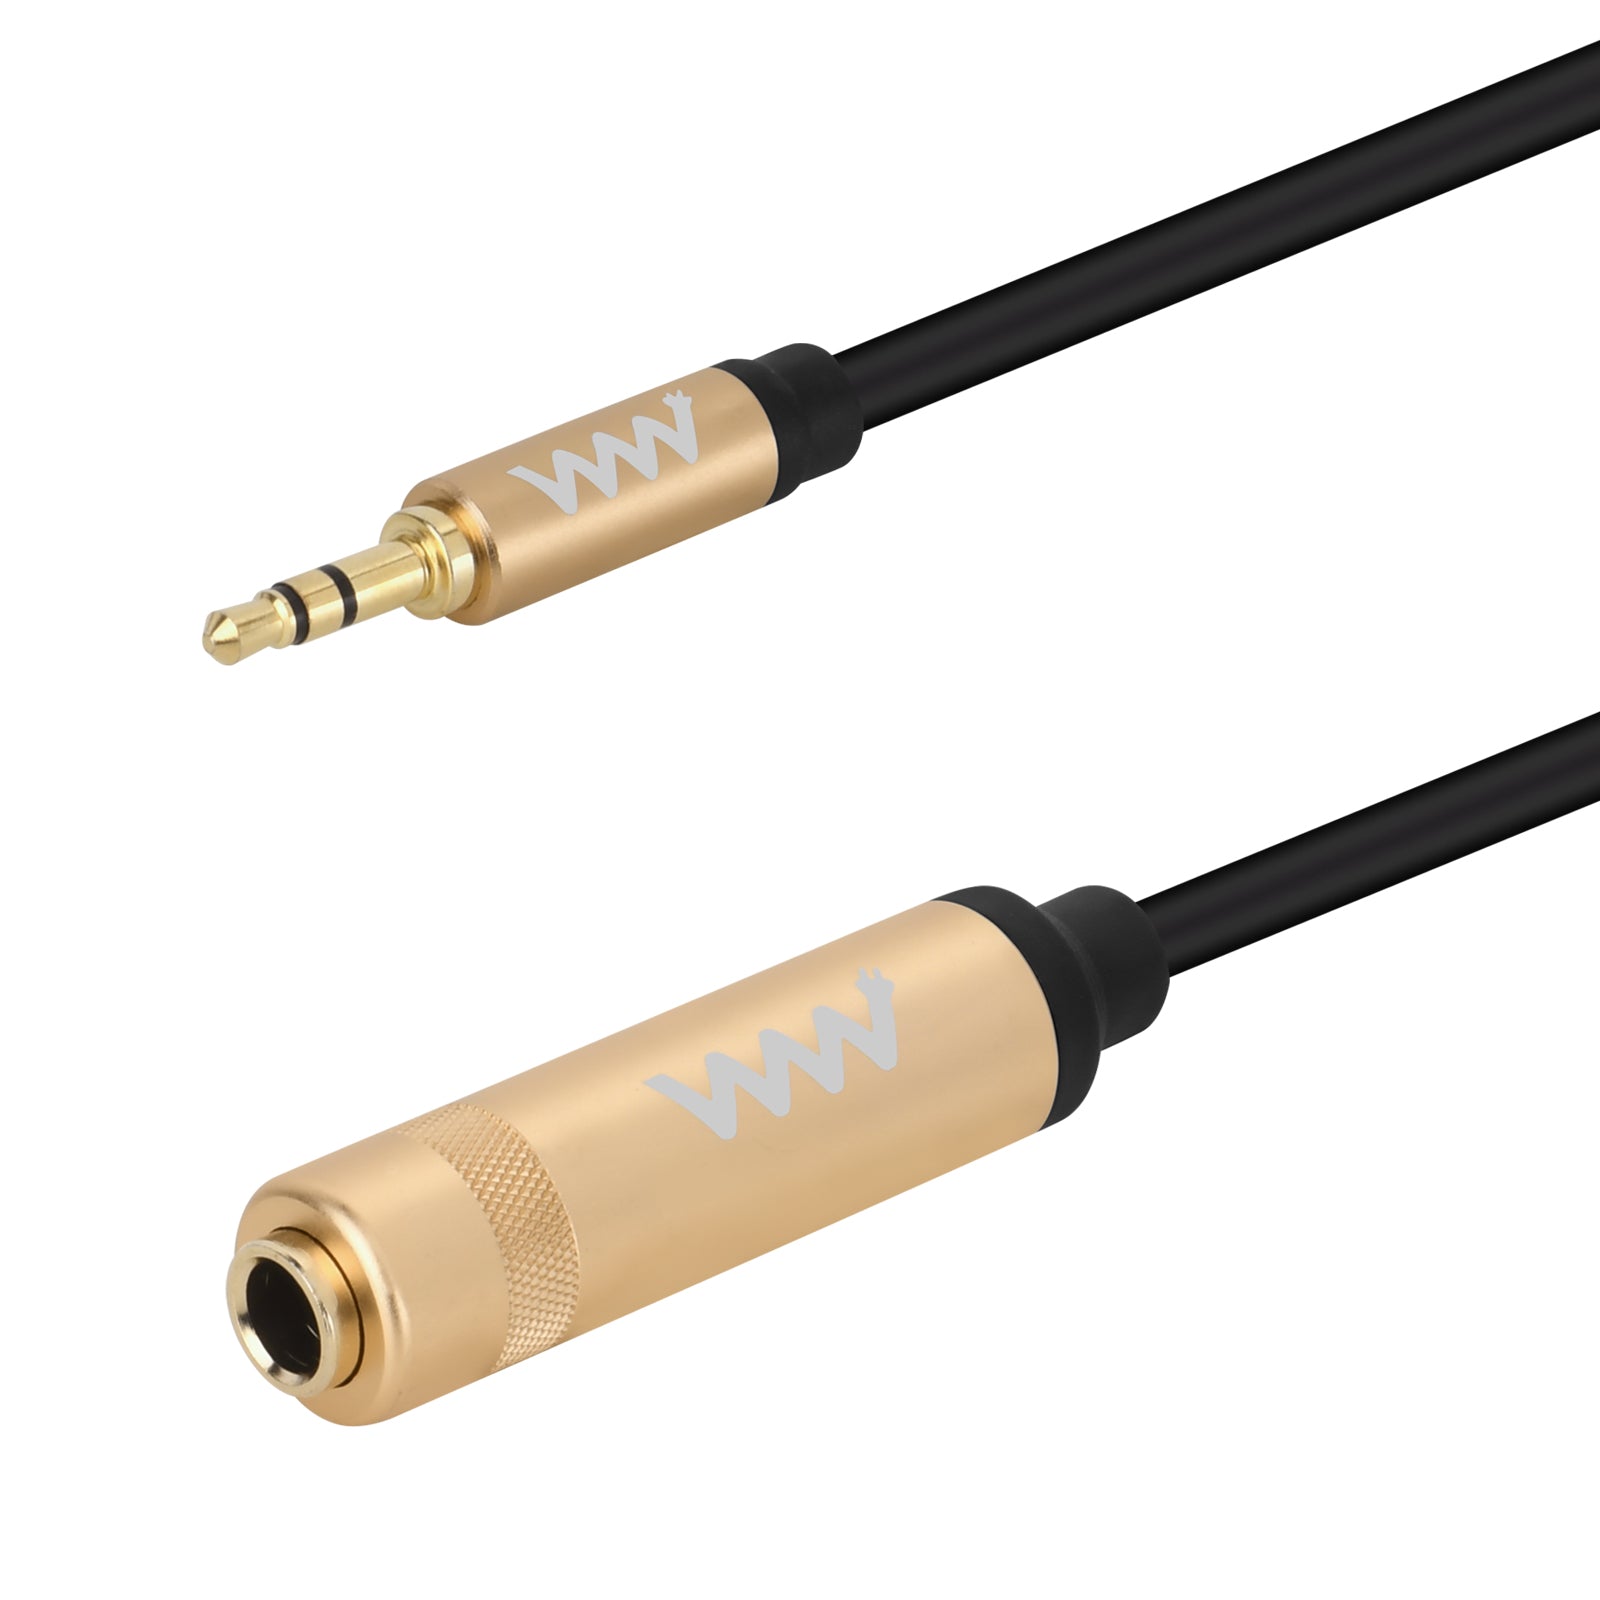 6.35mm TRS Female to 3.5mm Male (1/8 to 1/4) Stereo Headphone Convertor Cable 1m